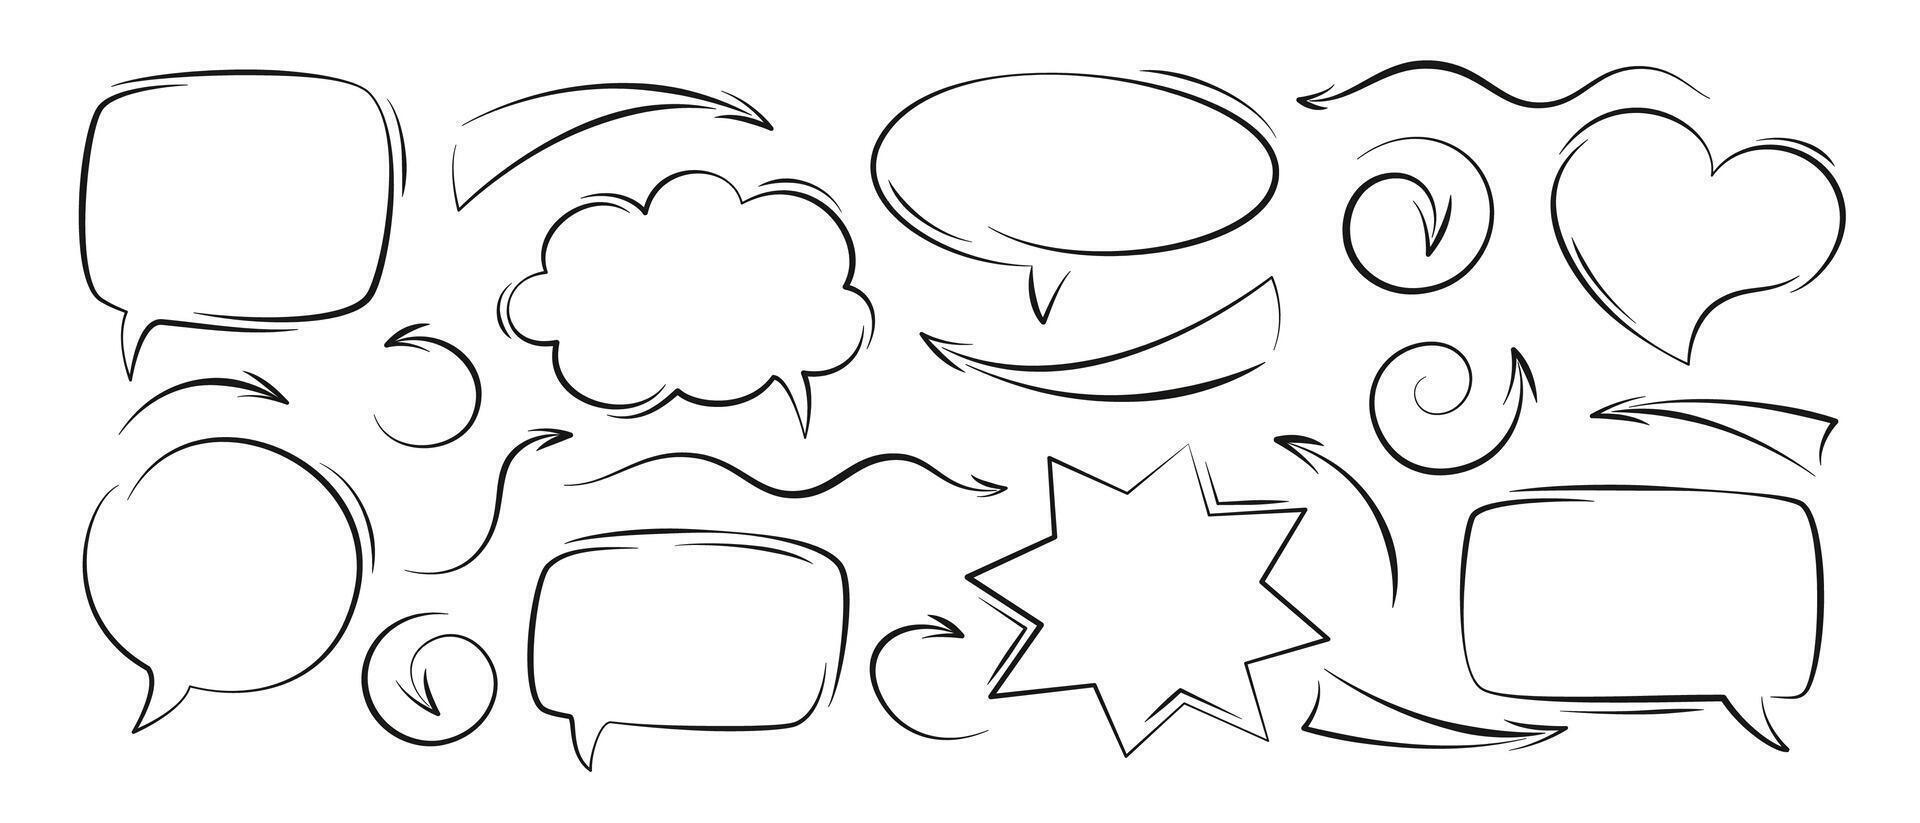 Set of hand drawn vector arrows and speech bubbles different shapes. Vector illustration